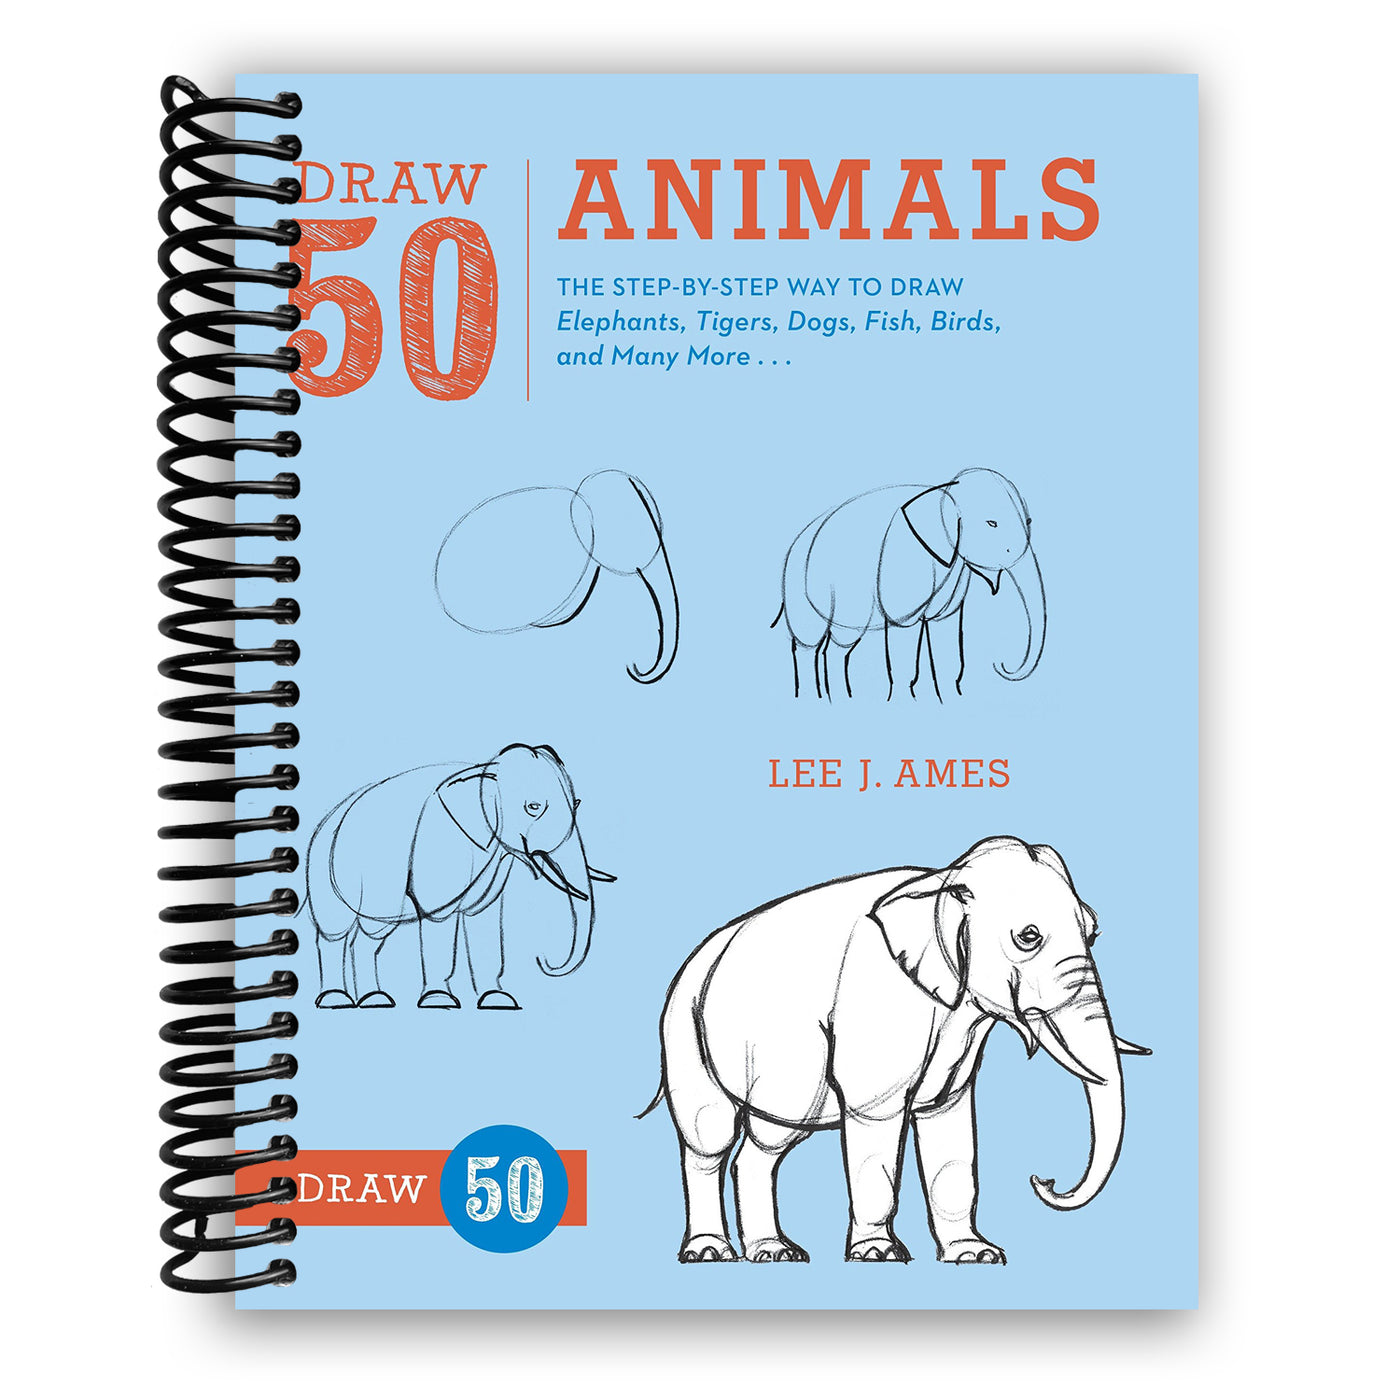 Draw 50 Animals: The Step-by-Step Way to Draw Elephants, Tigers, Dogs, Fish, Birds, and Many More‚Ä¶ (Spiral Bound)